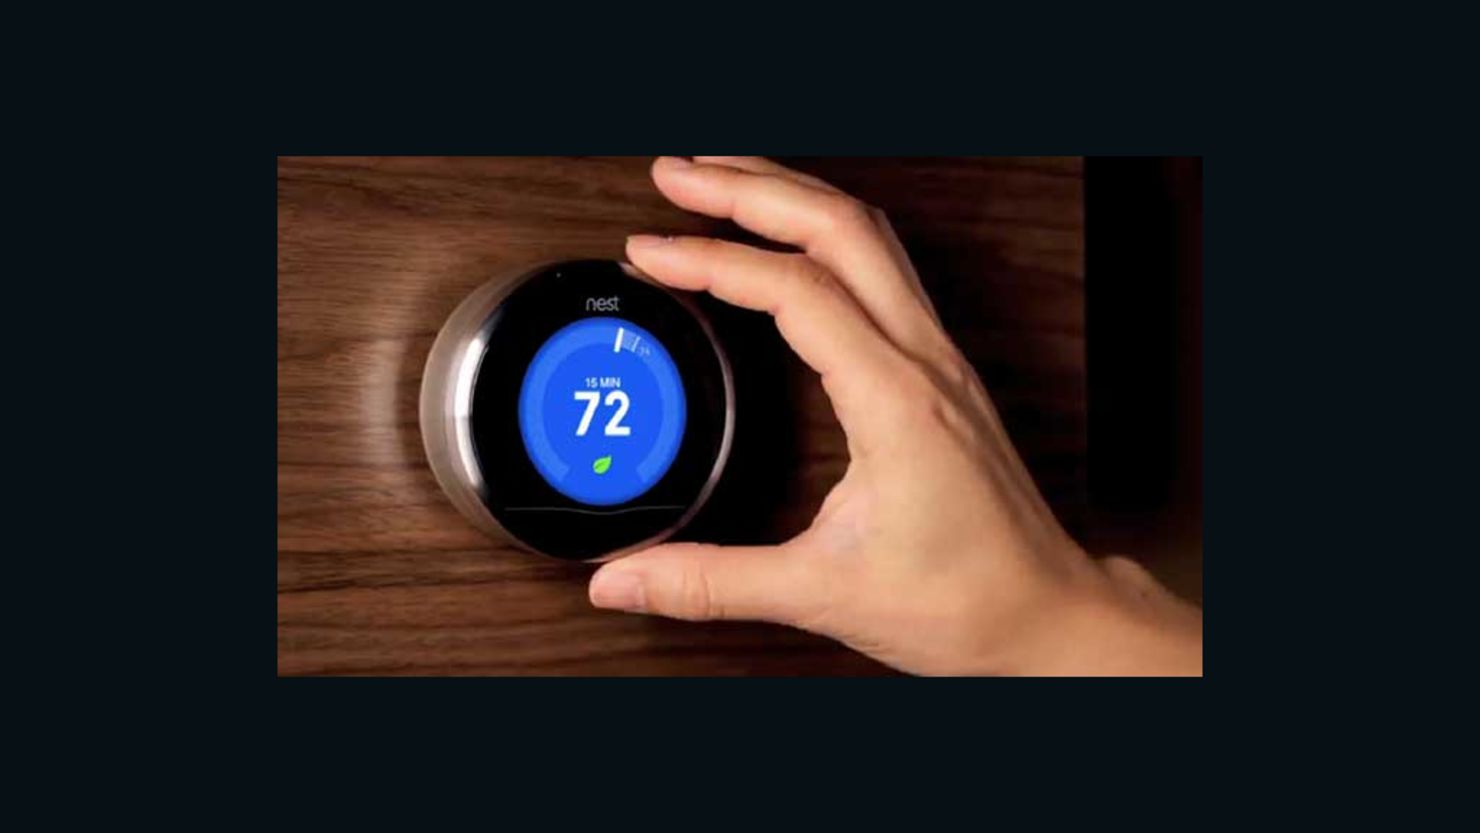 The makers of the Nest thermostat are coming up with new ways to tame demand for energy at peak times.